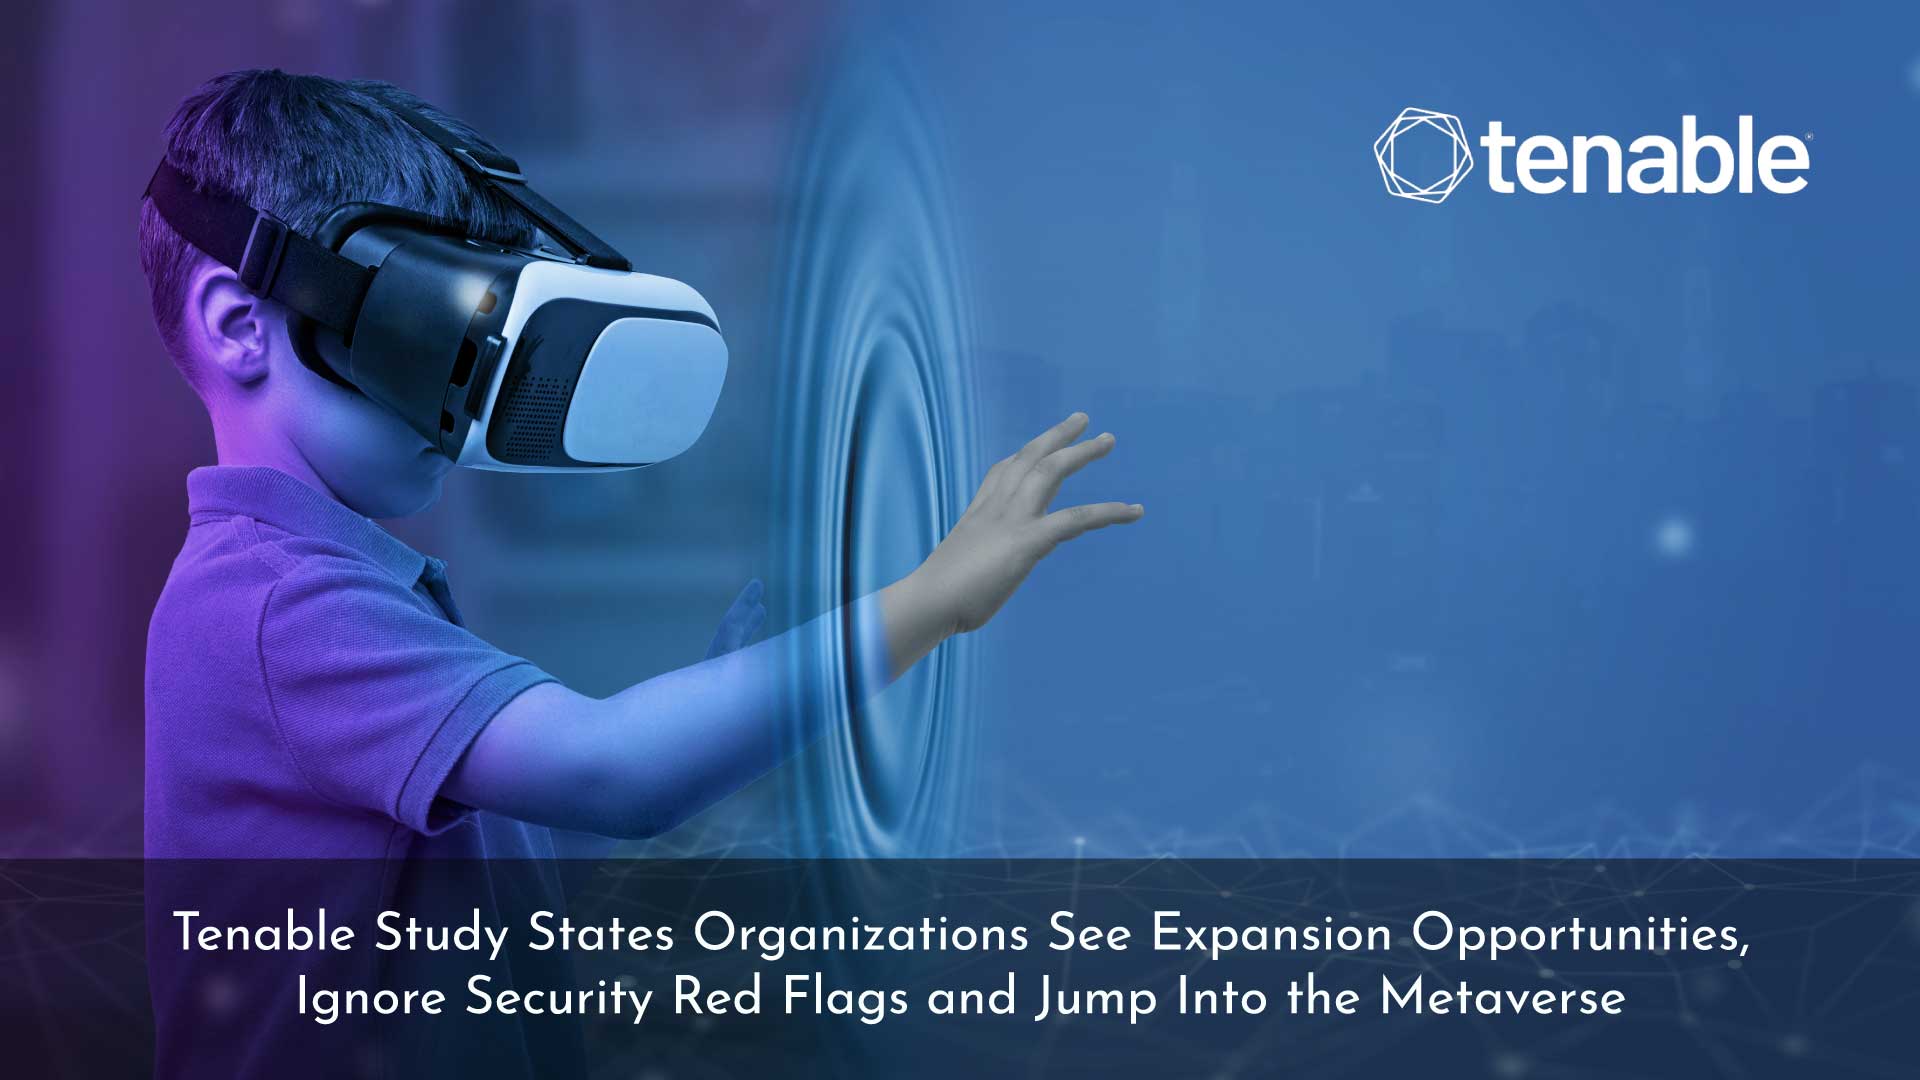 Tenable Study: Organizations See Expansion Opportunities, Ignore Security Red Flags and Jump Into the Metaverse